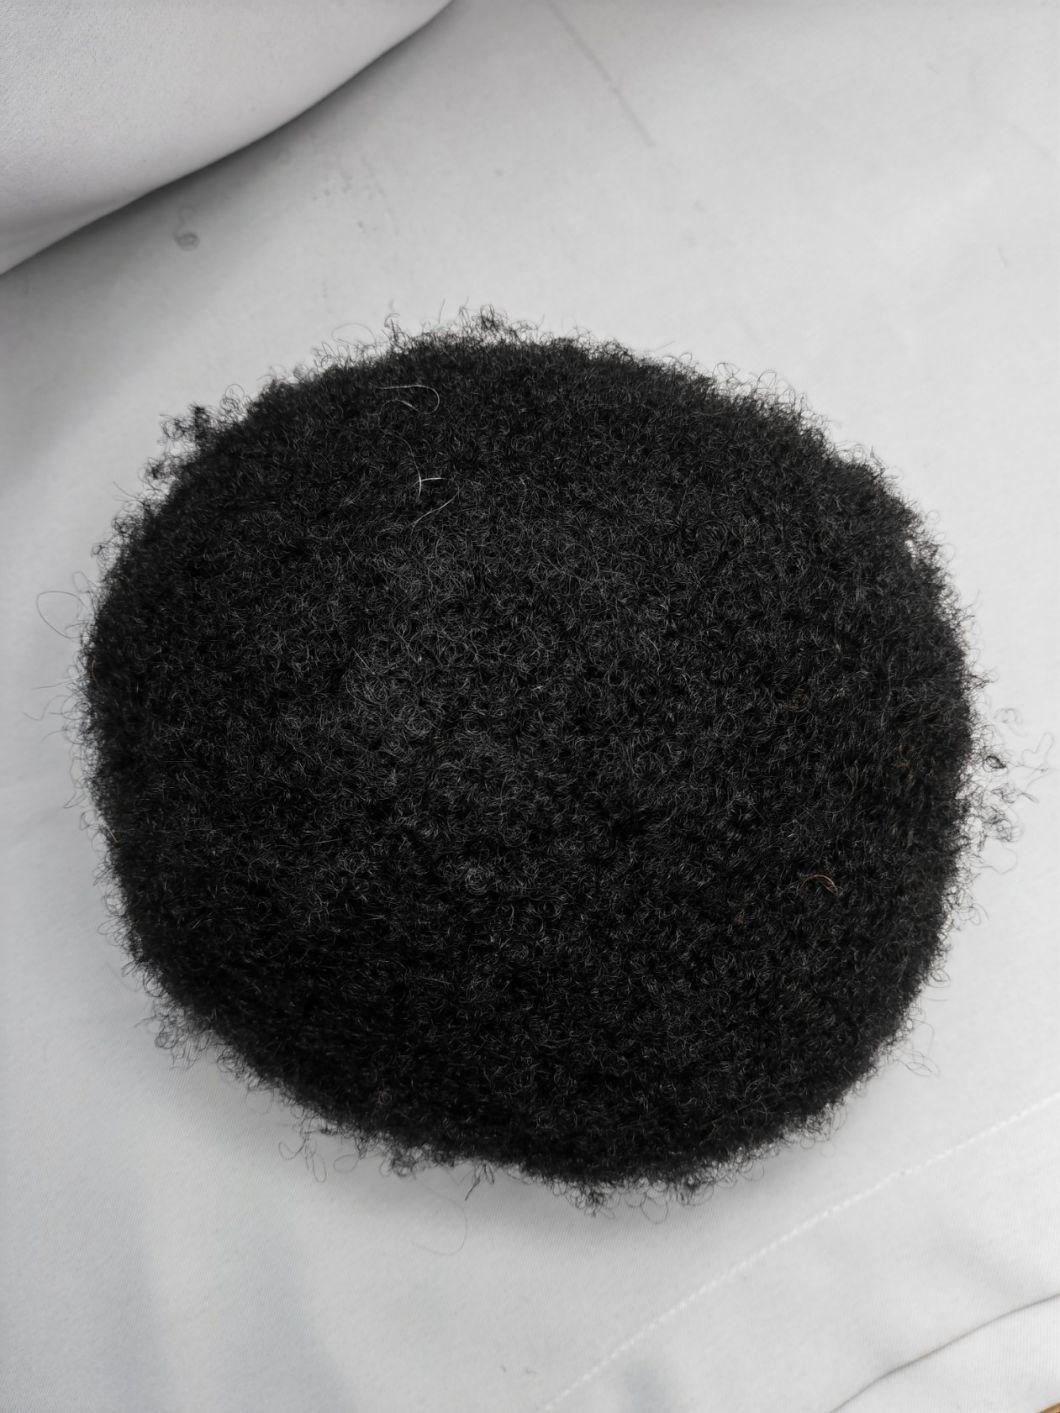 2022 Best Custom Made Natural Fine Mono Base Human Hair System Made of Remy Human Hair